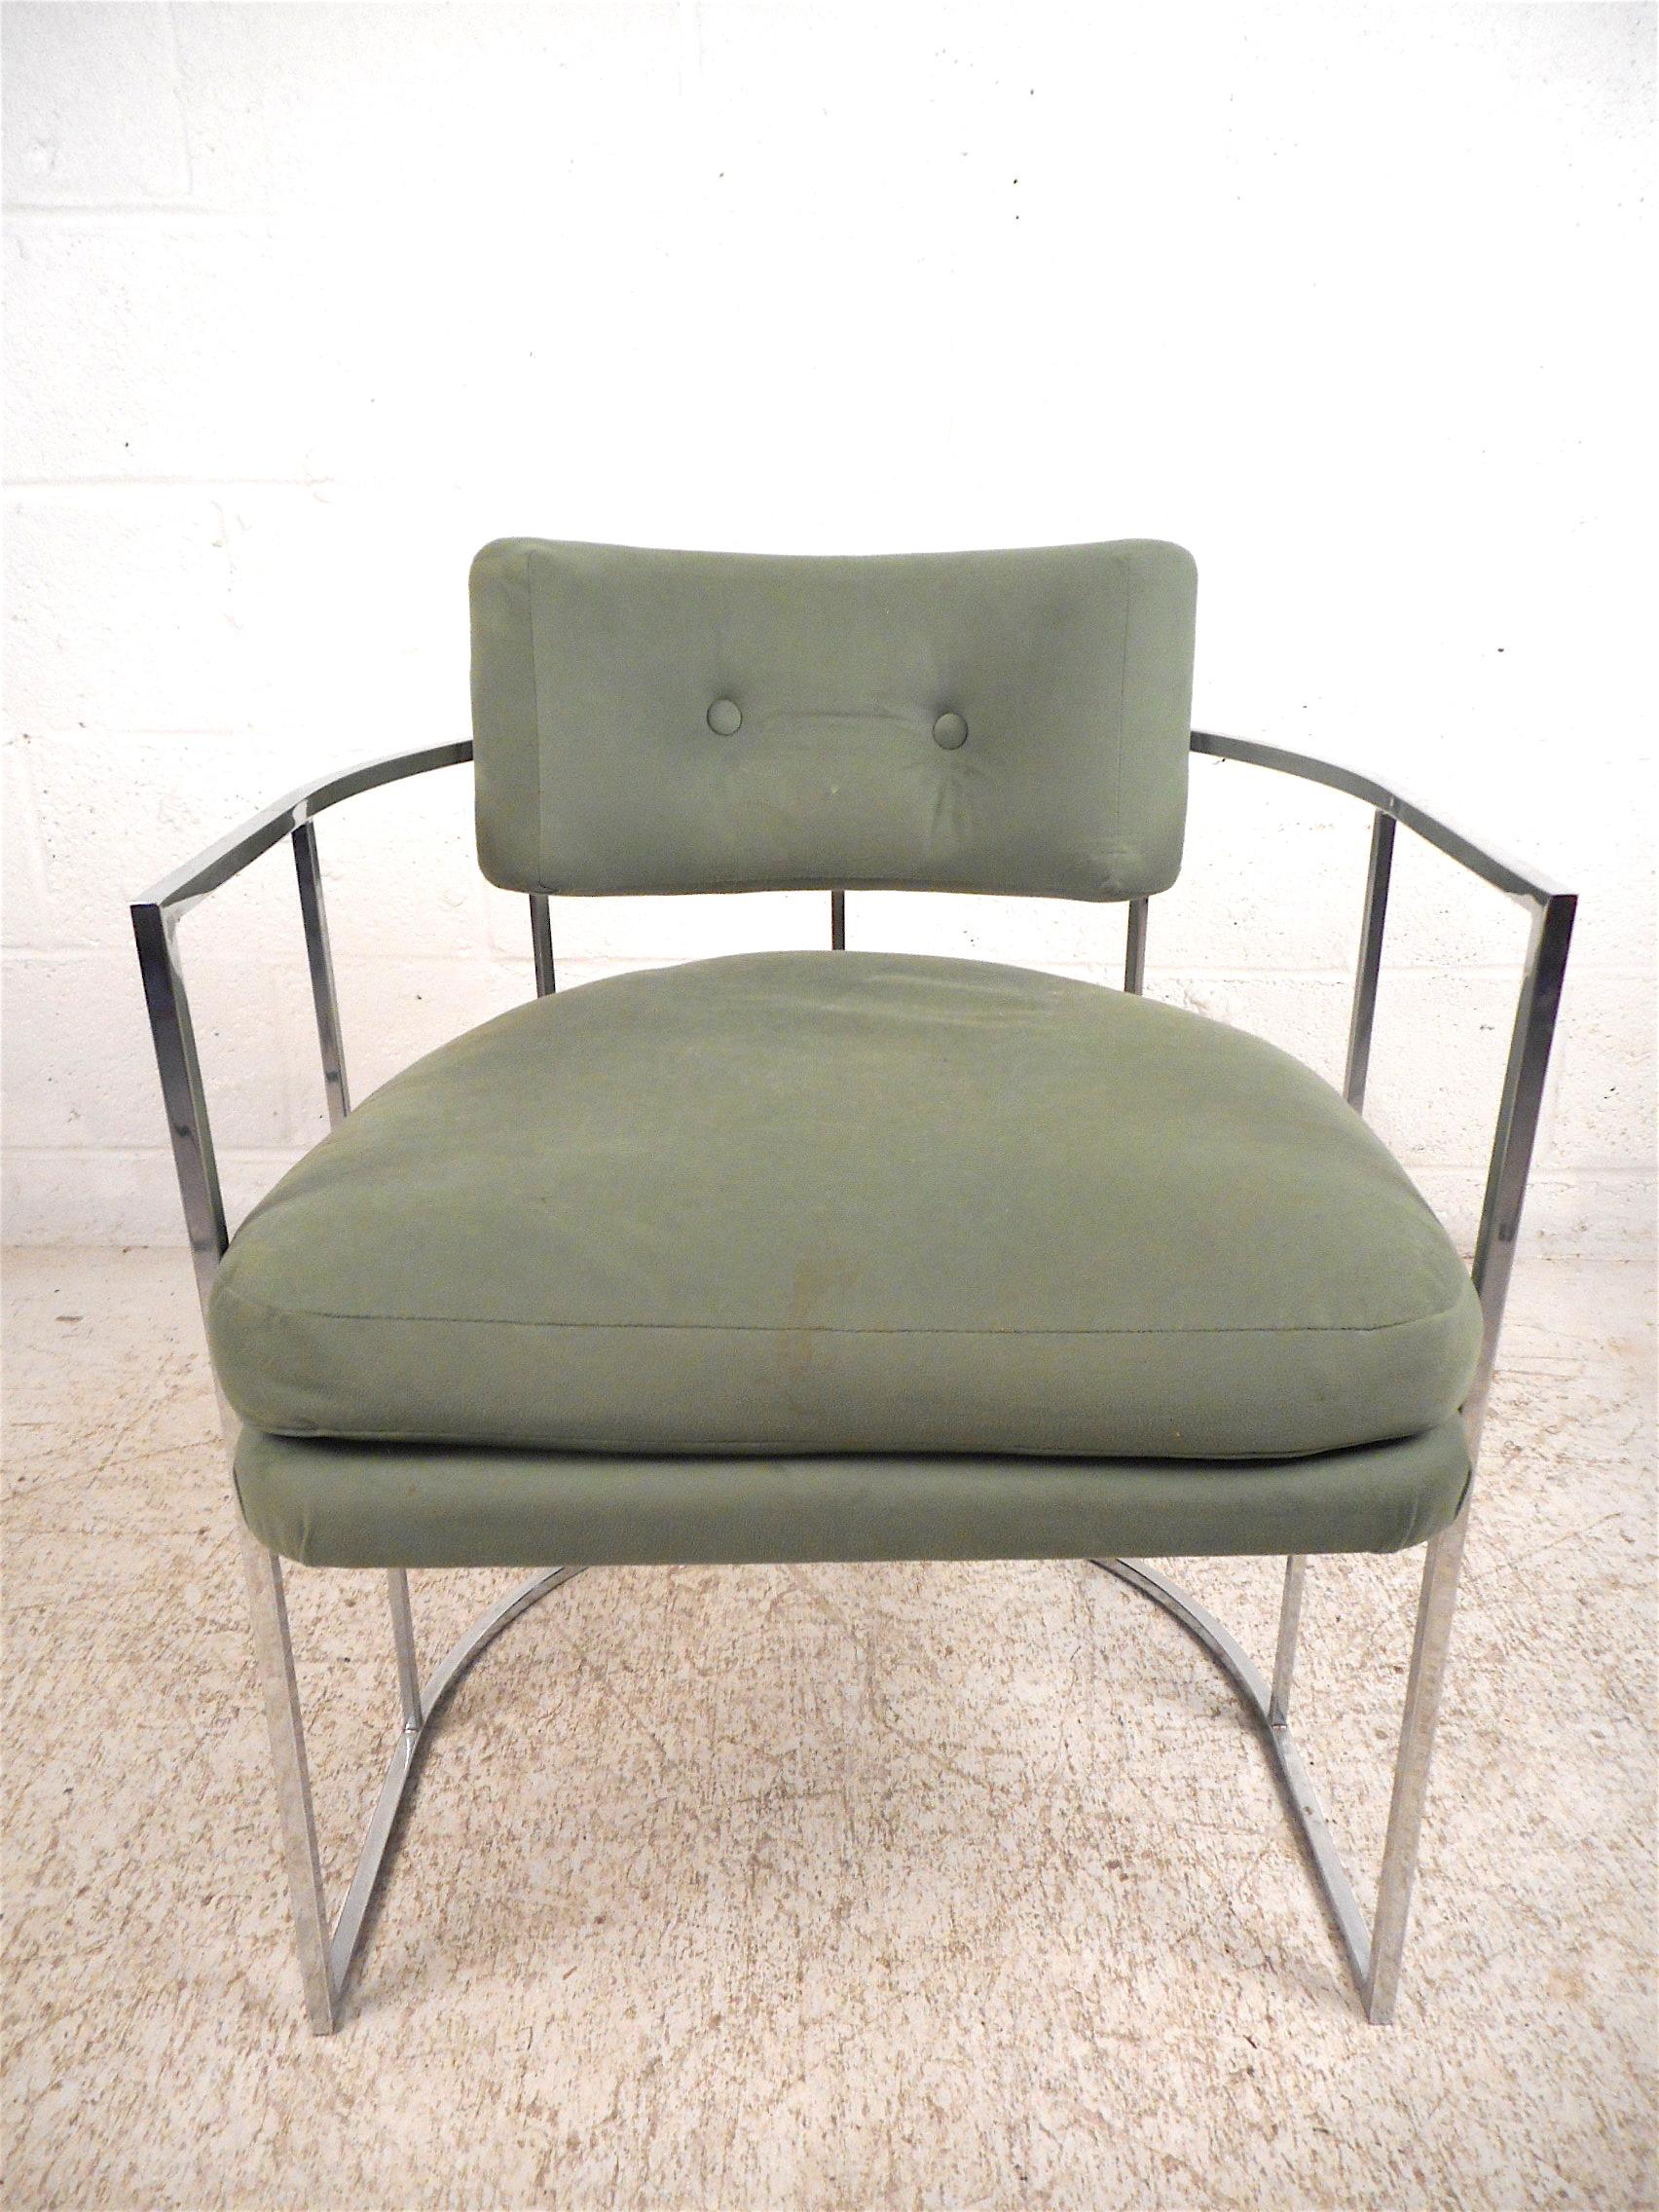 Stylish set of 4 barrel back dining chairs designed by Milo Baughman. Sturdy and sleek chrome frame which supports seat and backrest cushions that are covered in a vintage green upholstery. A great set sure to make an impression in any modern